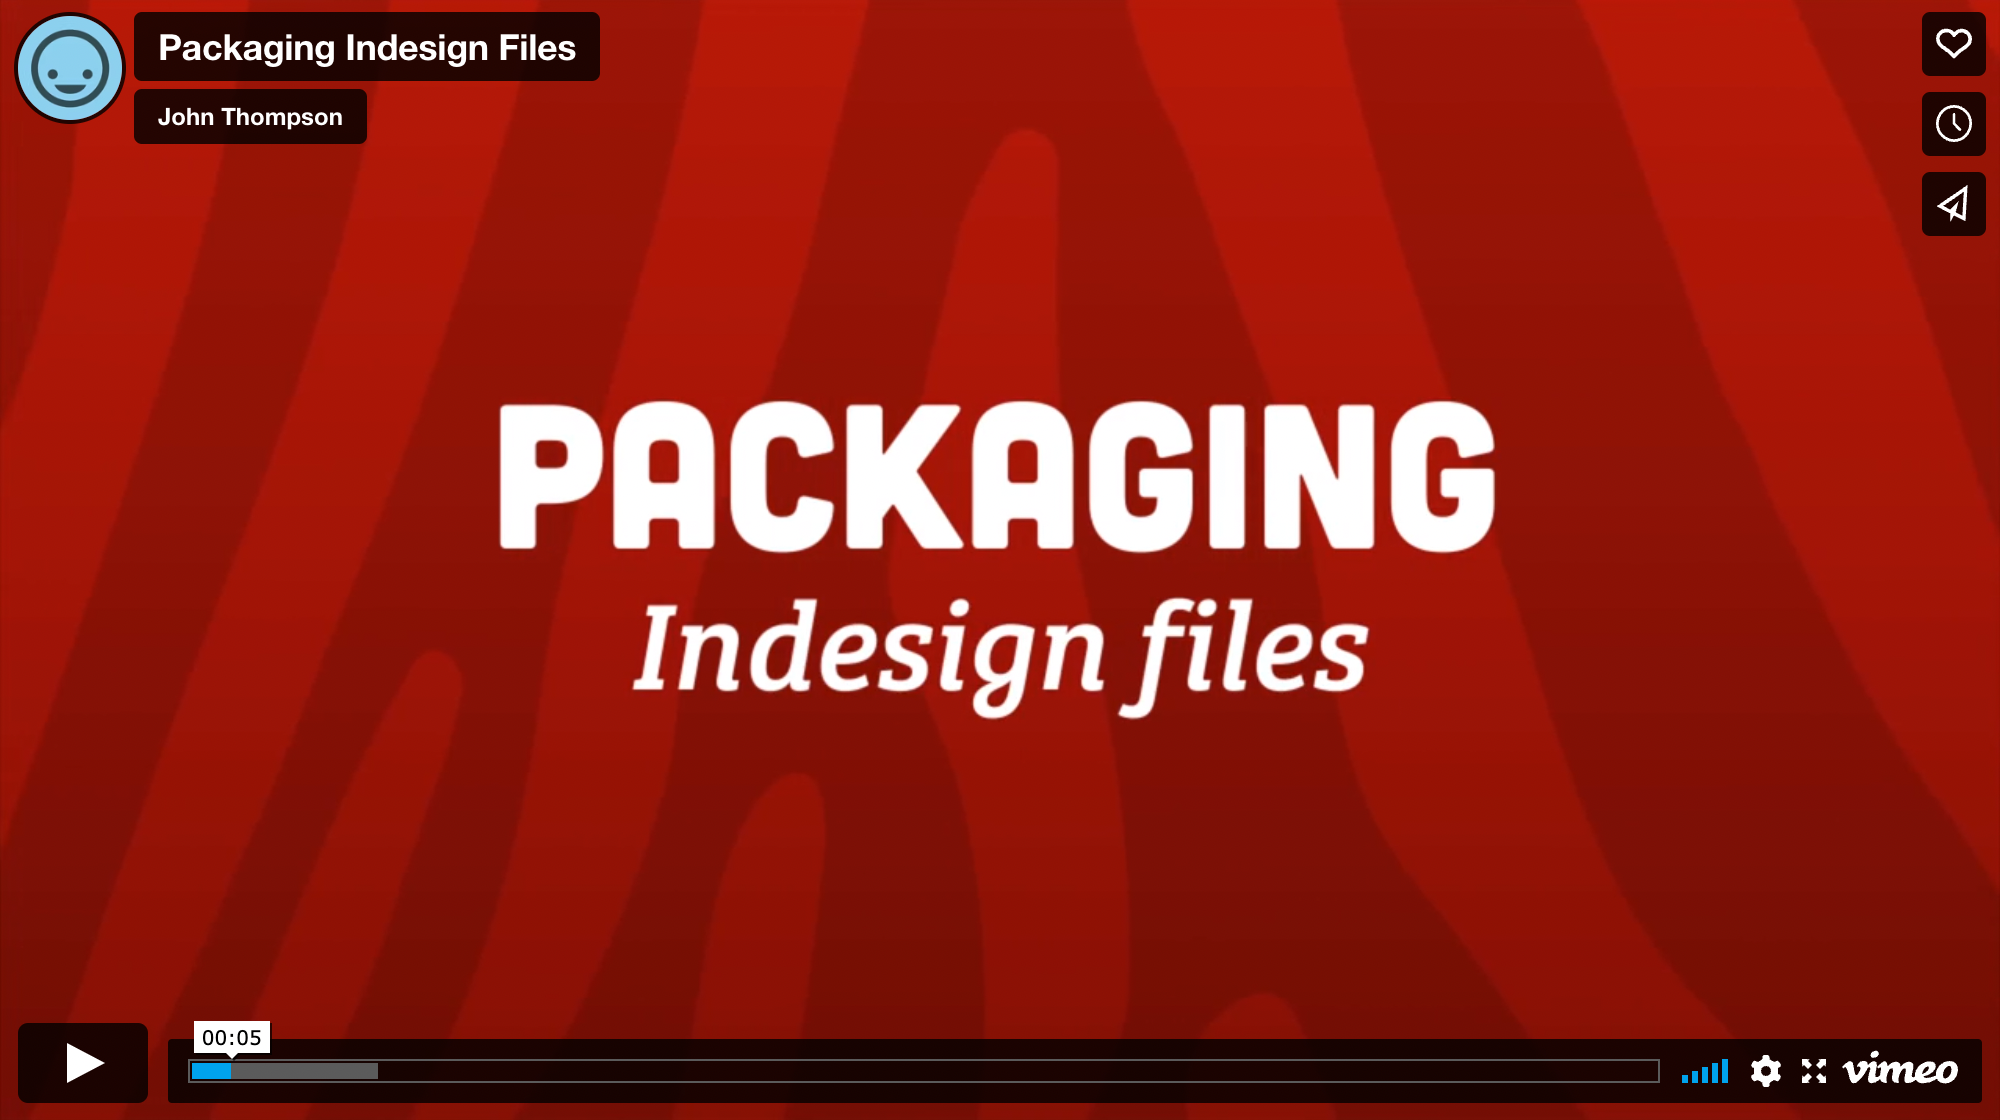 Packaging Indesign Files